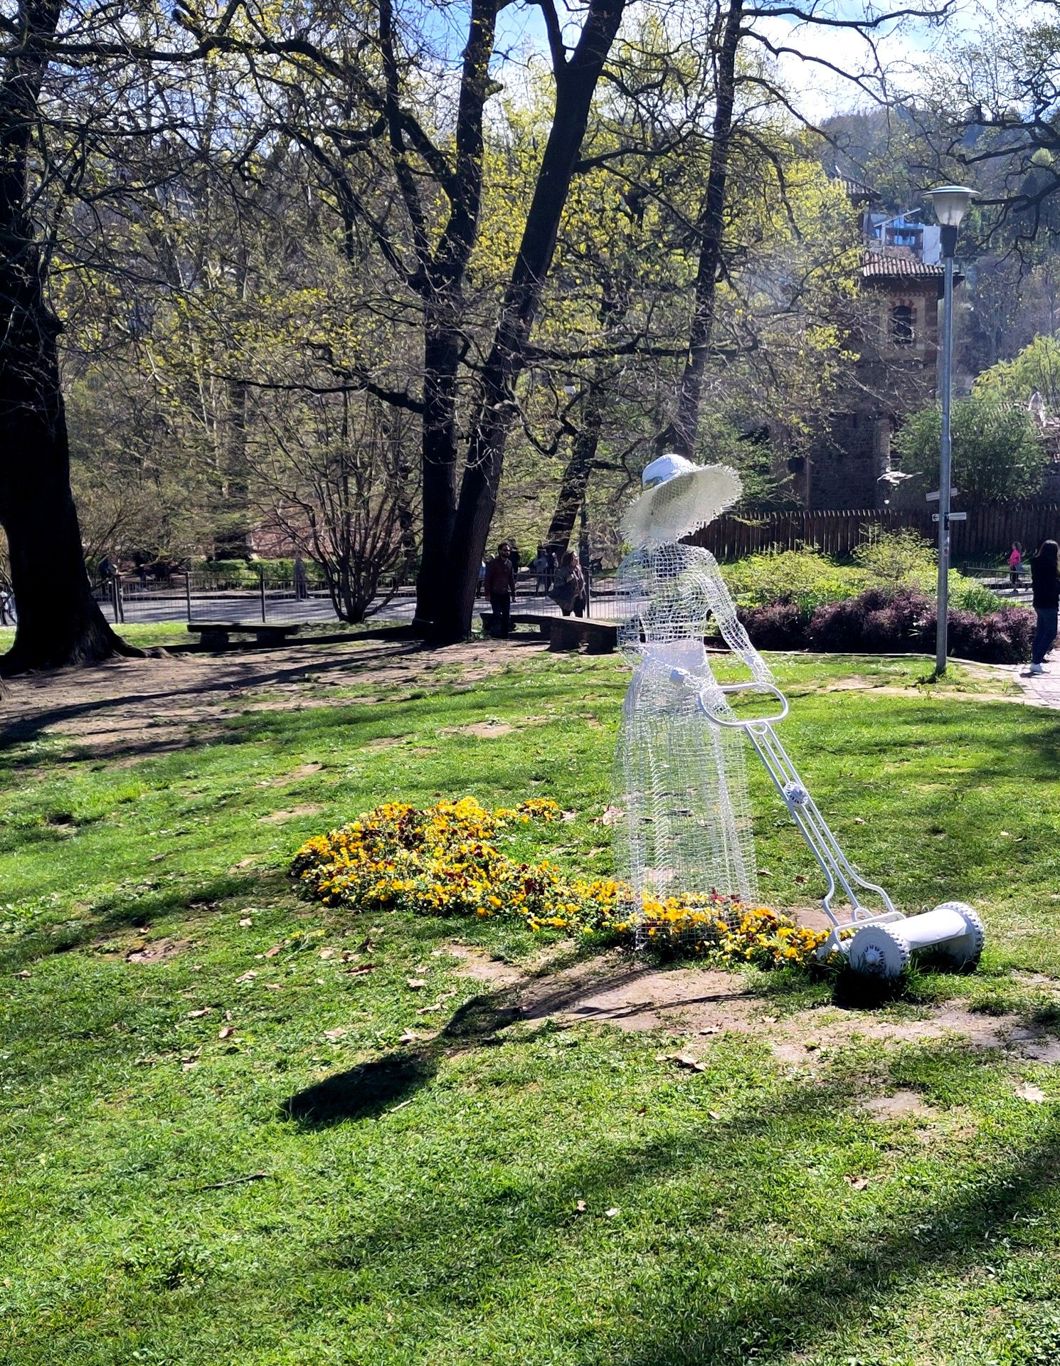 A really cute wire sculpture of a woman in a cute hat moving the very real garden.